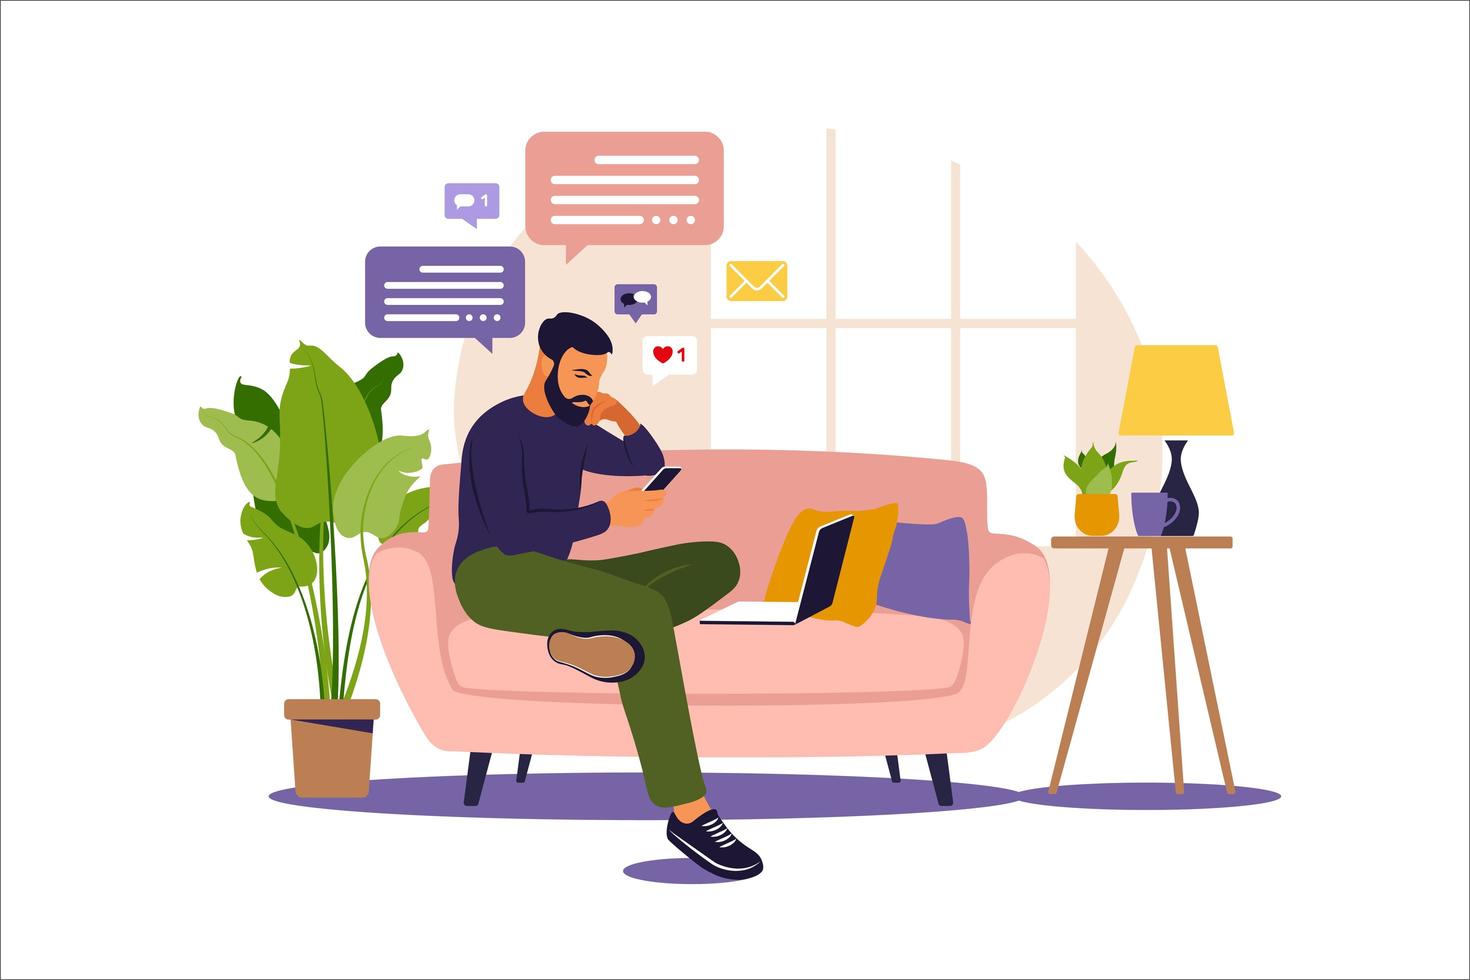 Man sitting in a sofa and working online at home. Freelance, online education or social media concept. Vector illustration isolated on white. Flat style.